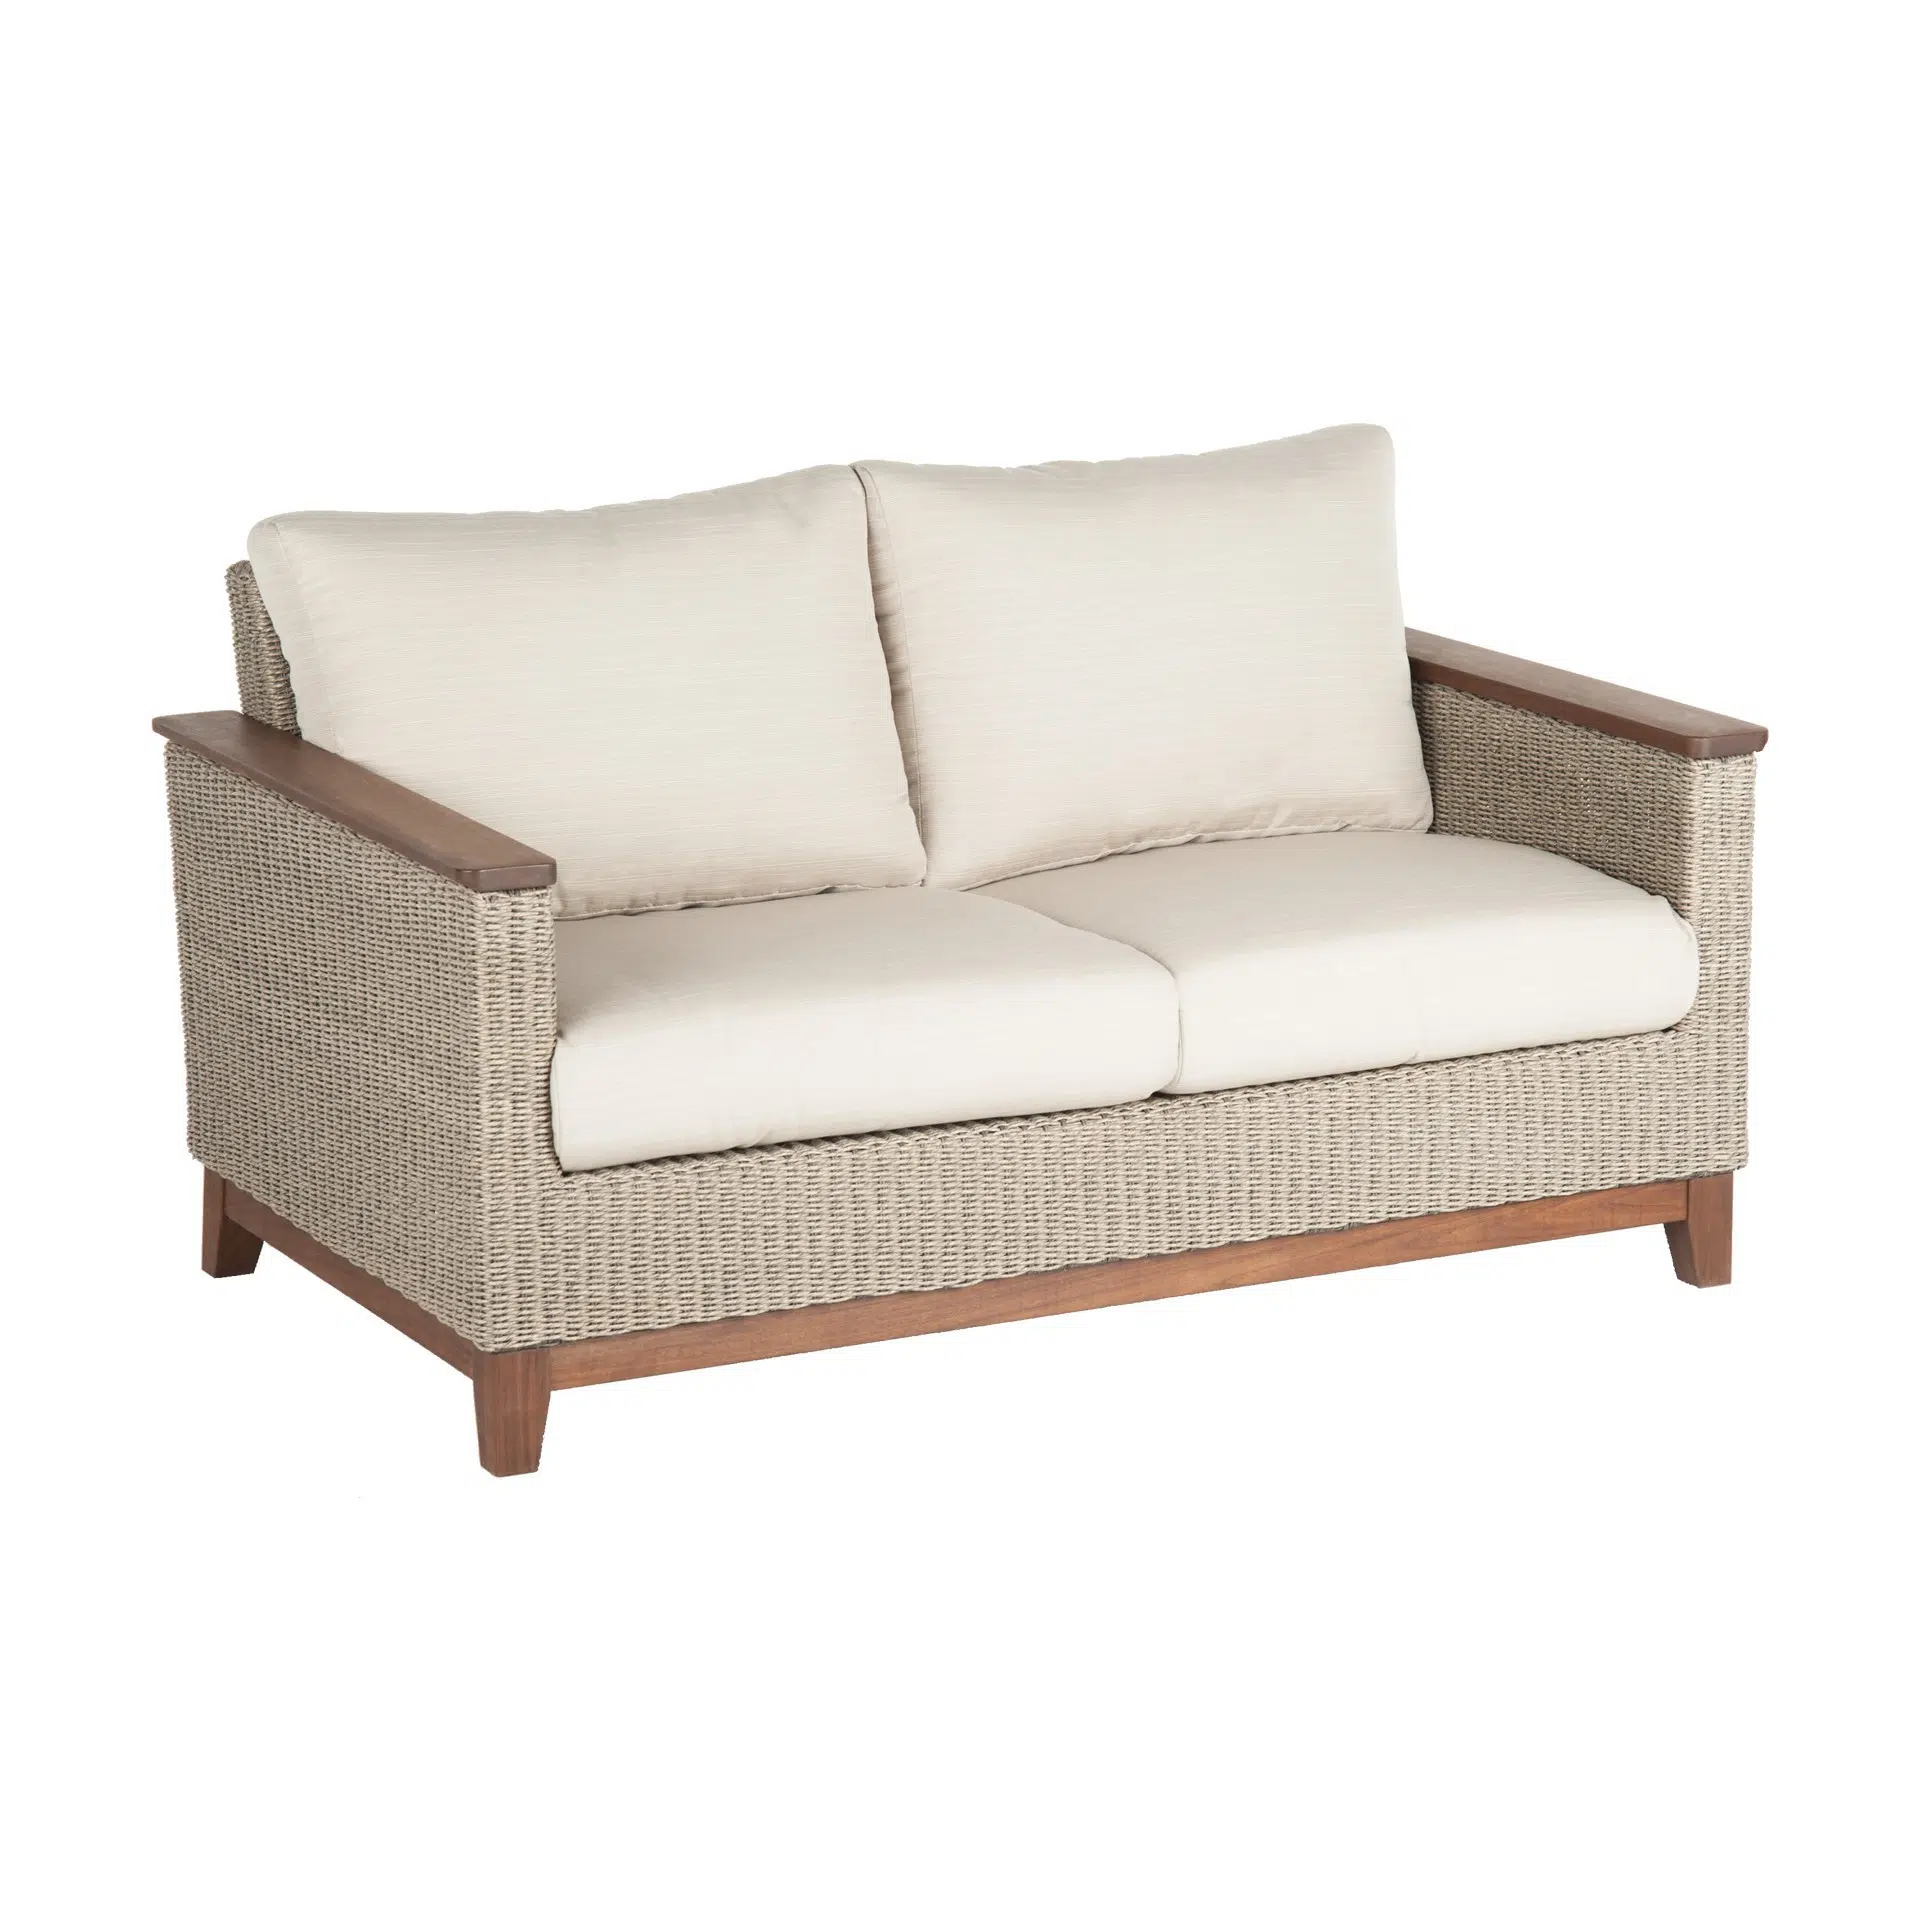 Coral loveseat natural hausers patio